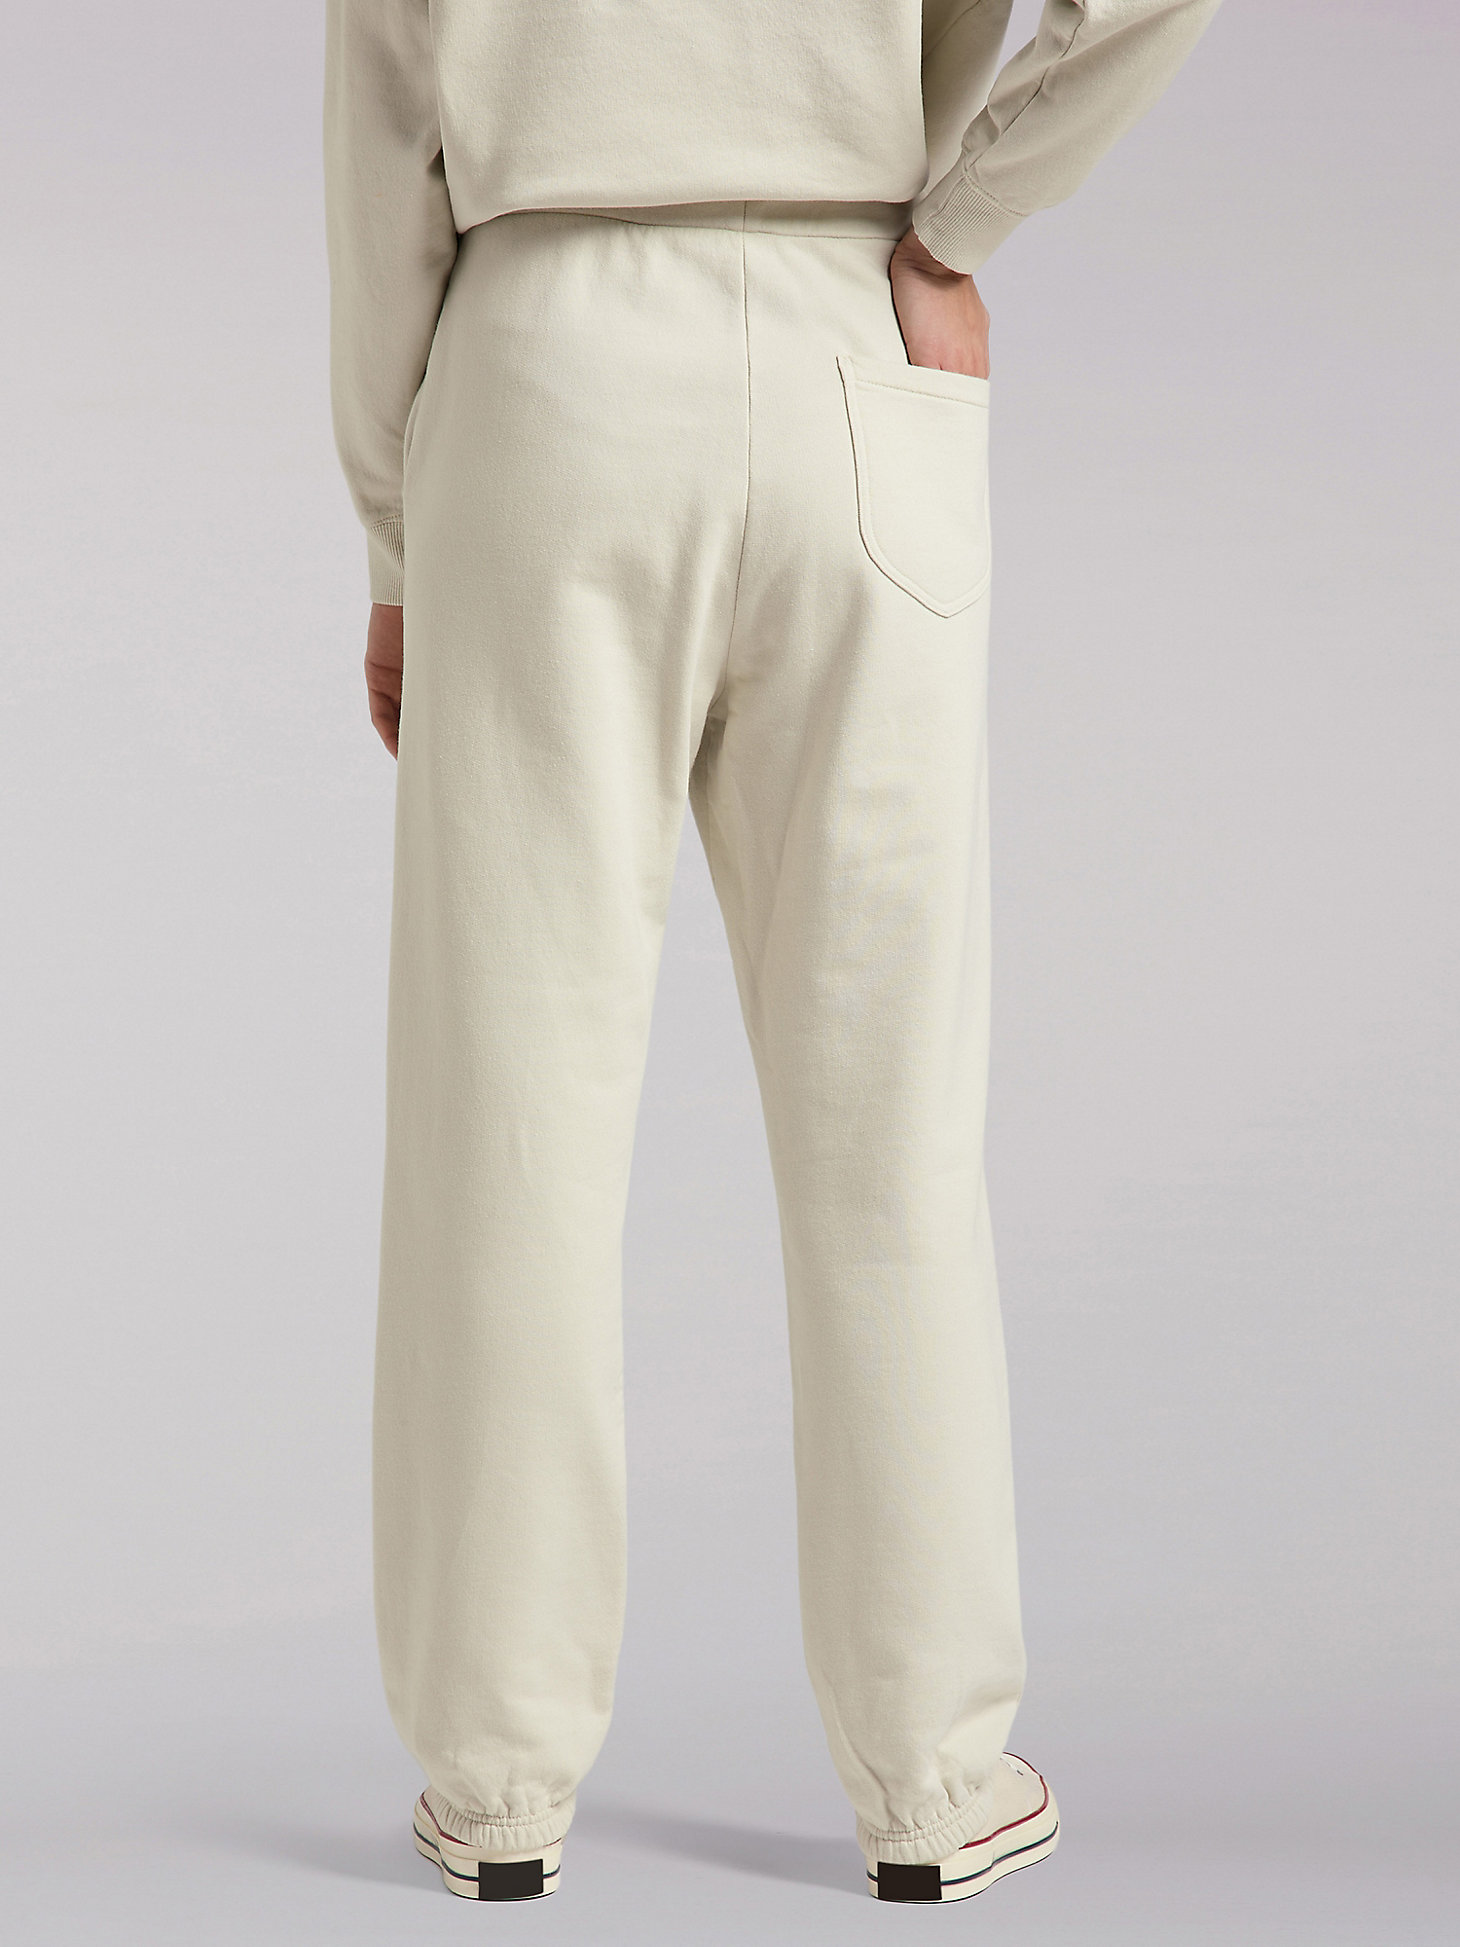 Women's Lee European Collection High Rise Relaxed Sweatpant in Workwear White alternative view 3